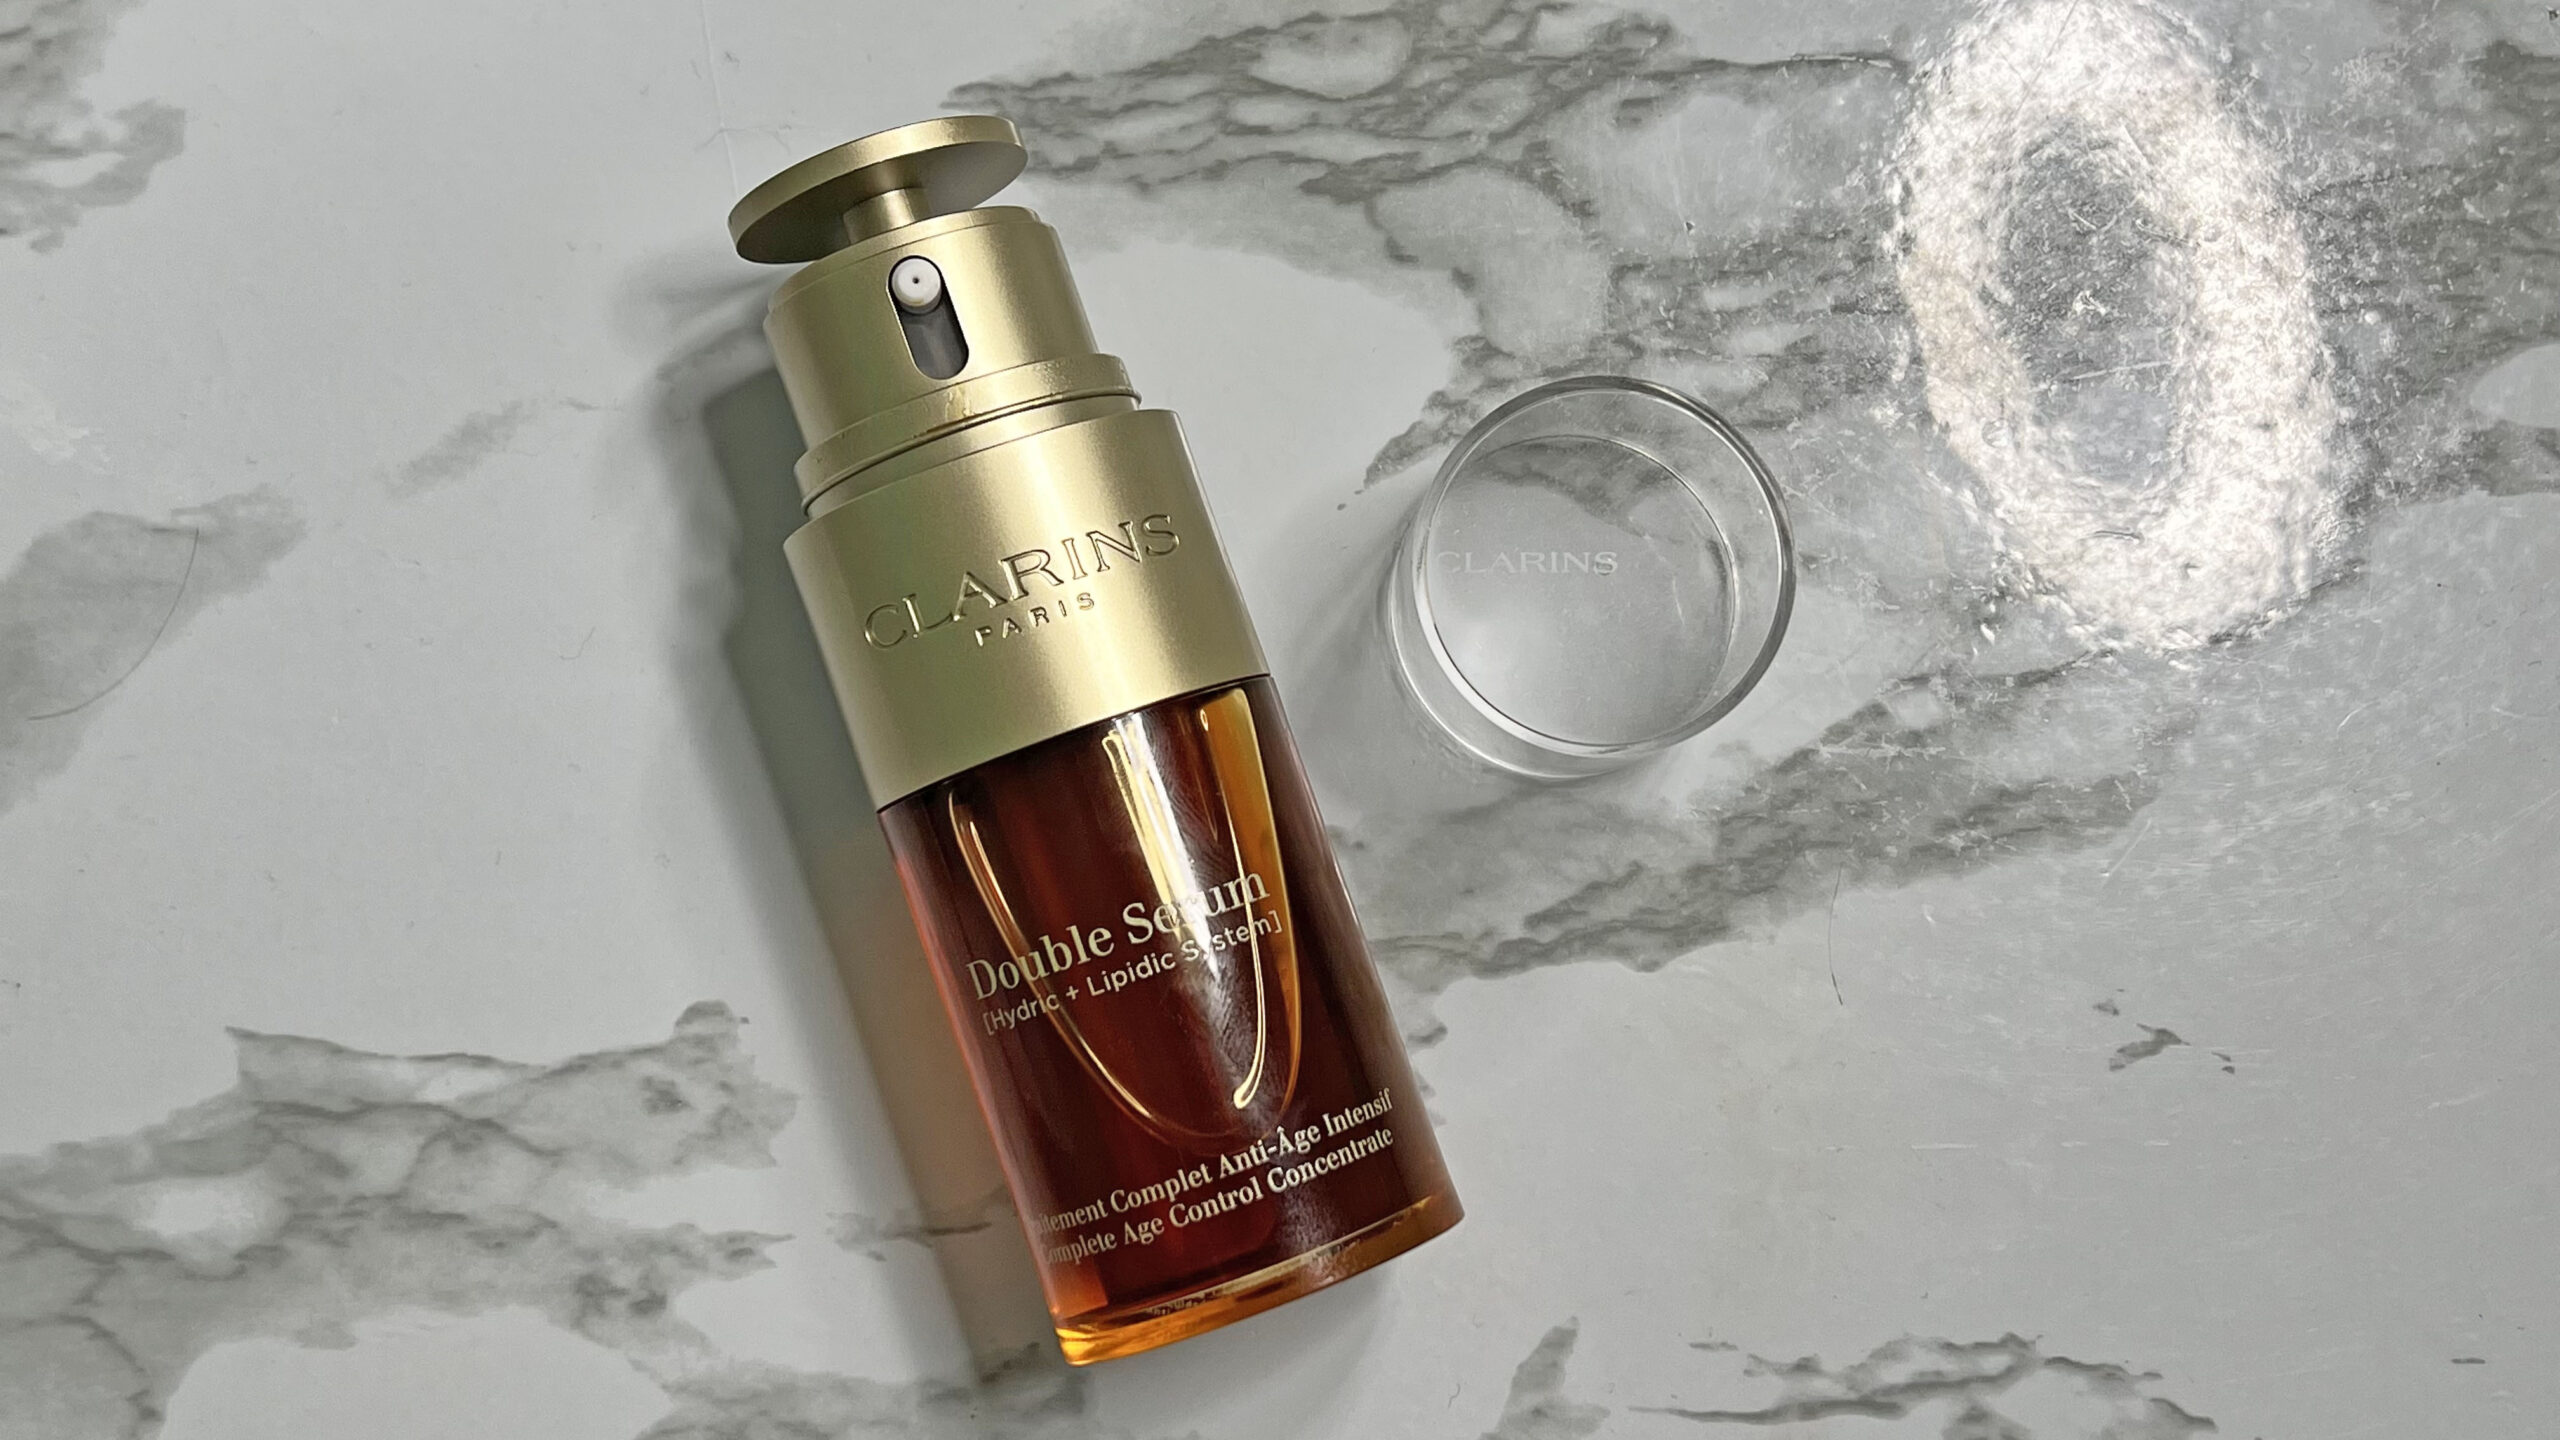 Double Serum Clarins review